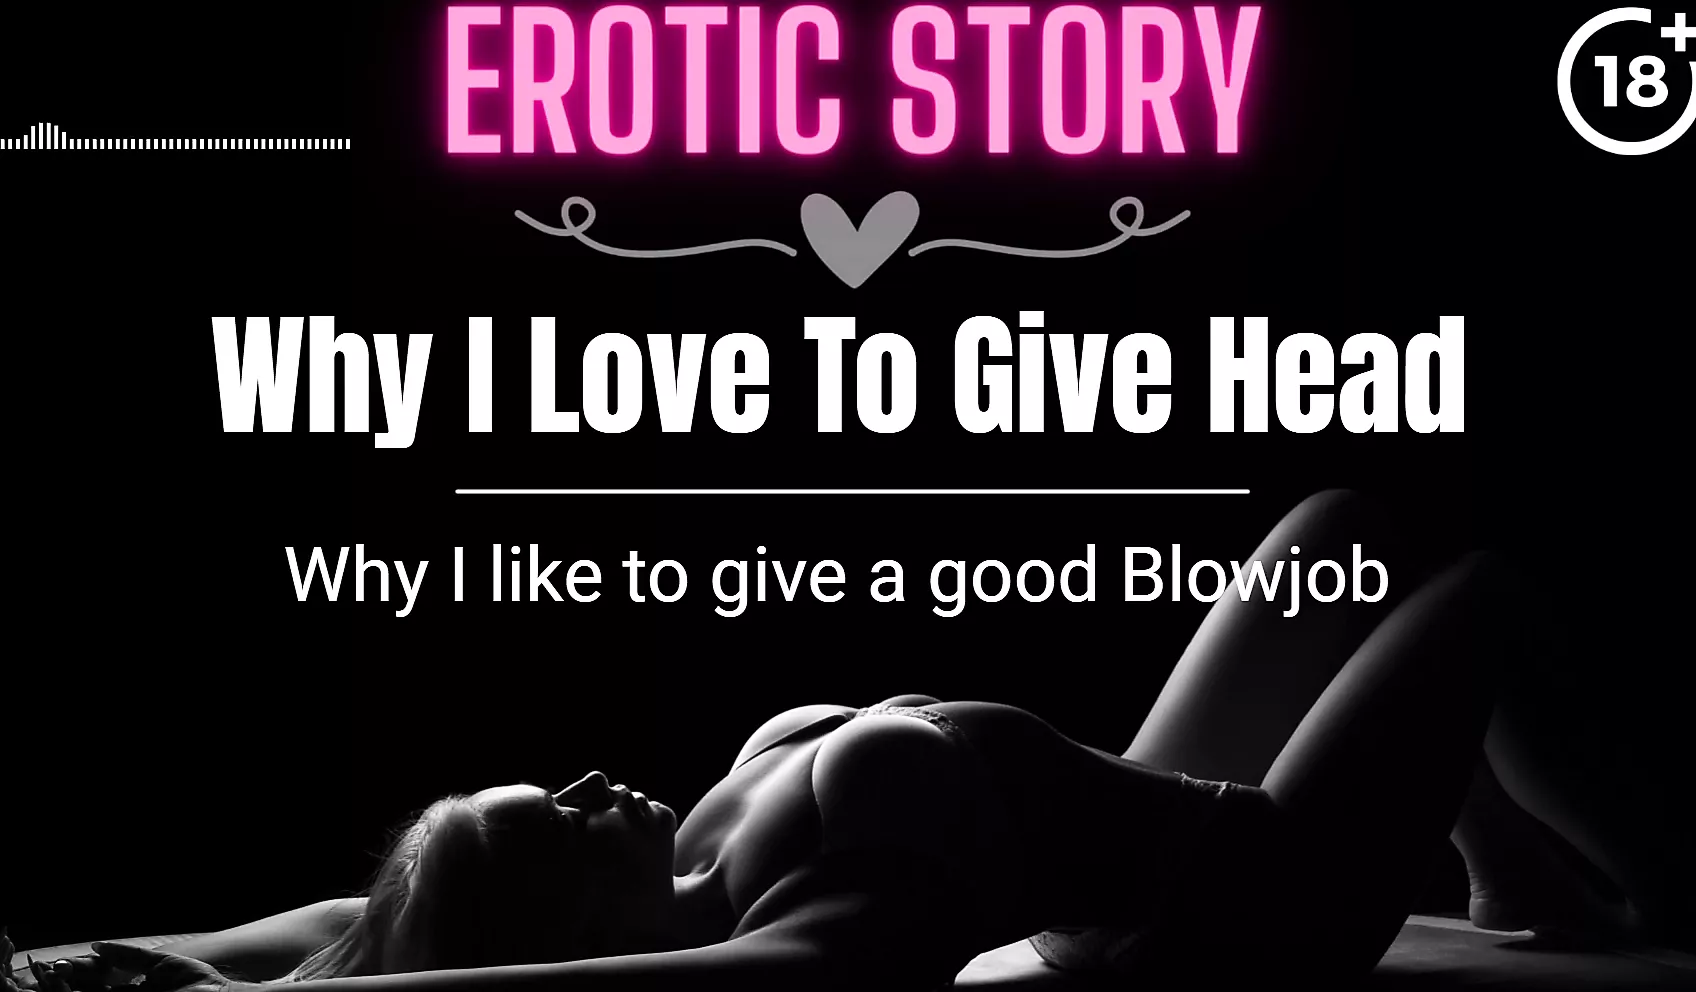 EROTIC AUDIO STORY) Why I love to give Head